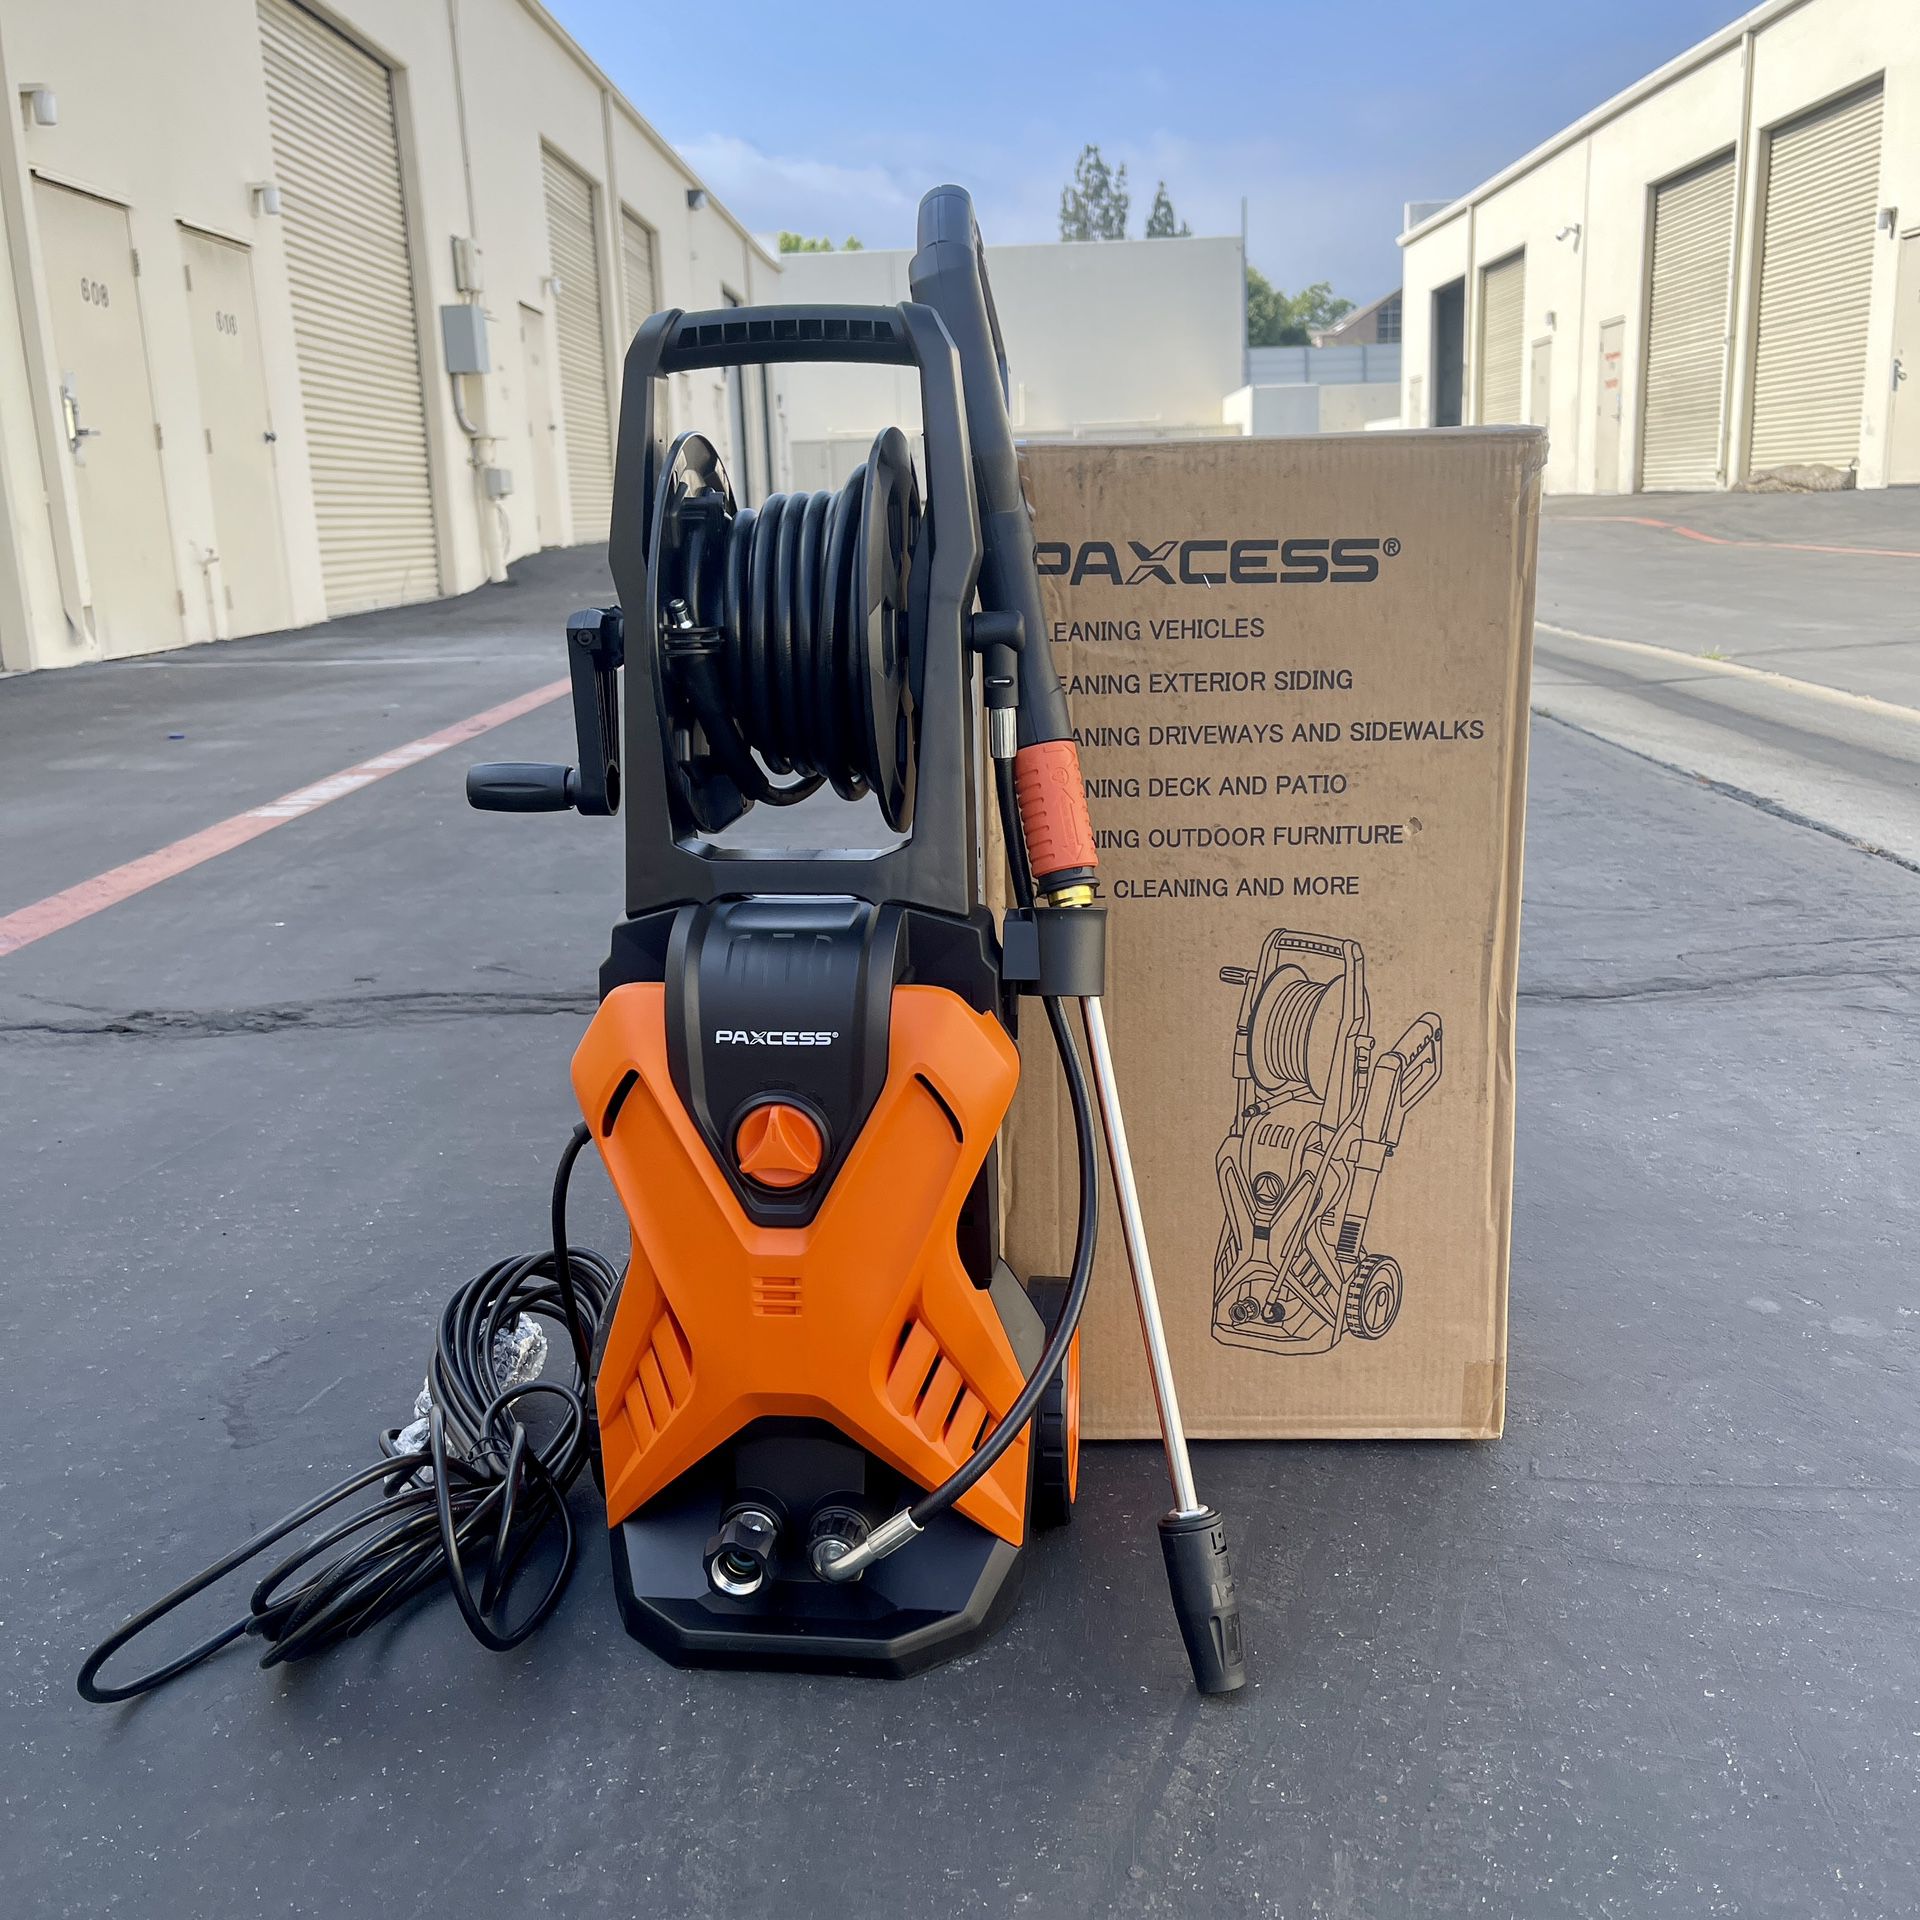 PAXCESS Electric Power Washer with Adjustable Spray Nozzle, Hose Real, and Wheels for Cleaning Cars, Patios, Decks, and Driveways